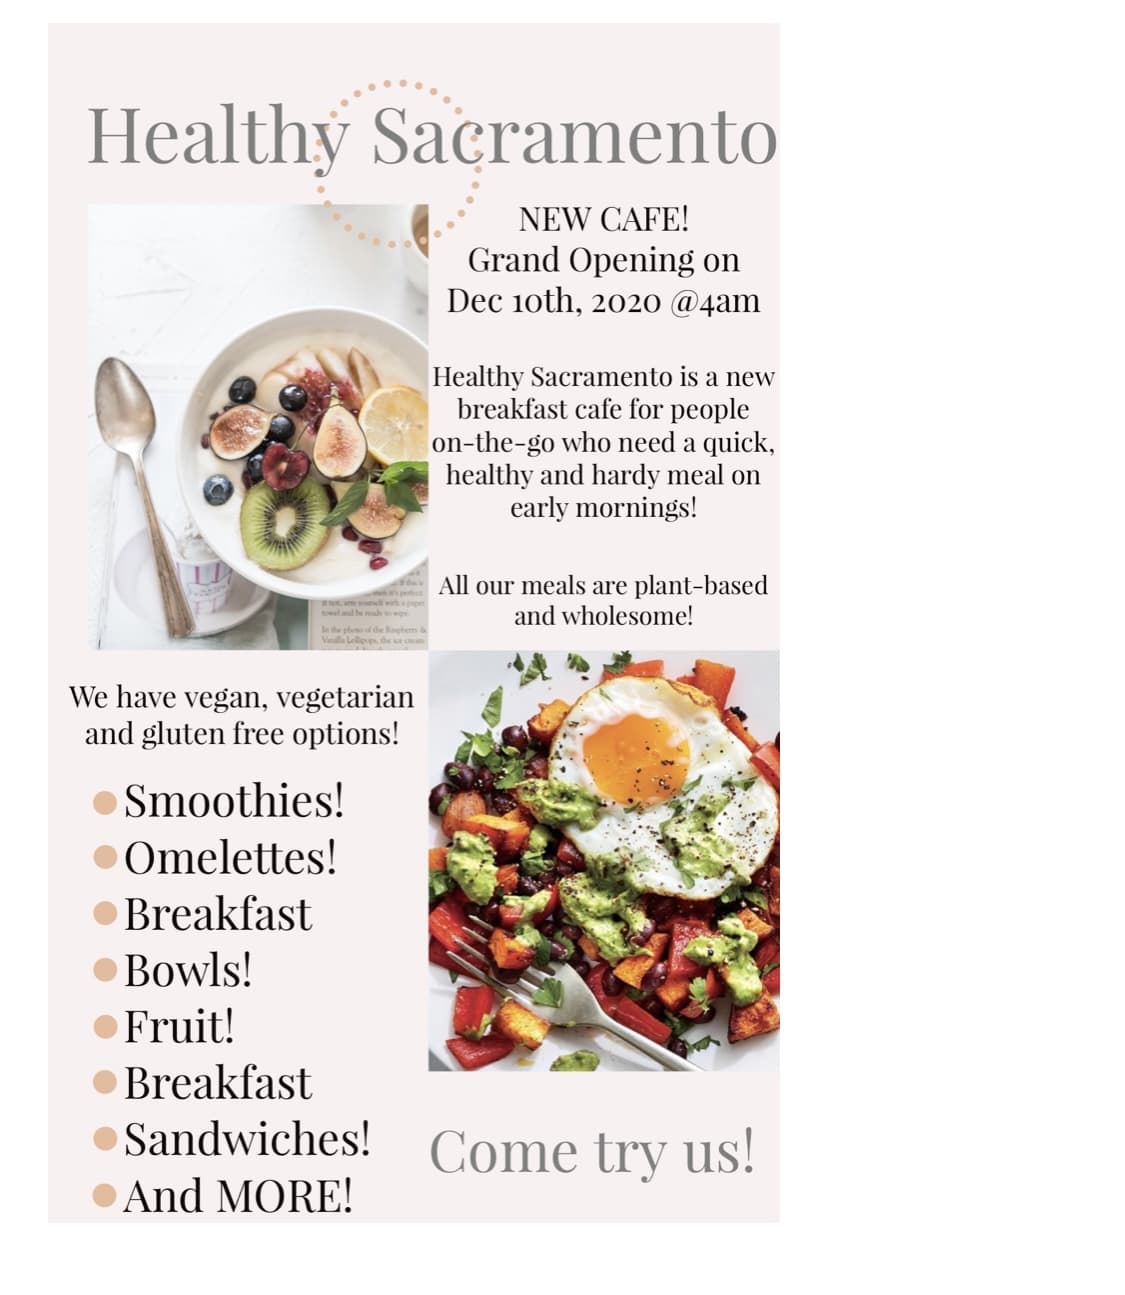 Healthy Sacramento
NEW CAFE!
Grand Opening on
Dec 1oth, 2020 @4am
Healthy Sacramento is a new
breakfast cafe for people
on-the-go who need a quick,
healthy and hardy meal on
early mornings!
All our meals are plant-based
and wholesome!
In the phono of the Rapbery &
Villa Lellipeps the oe cream
We have vegan, vegetarian
and gluten free options!
Smoothies!
• Omelettes!
• Breakfast
• Bowls!
•Fruit!
• Breakfast
• Sandwiches!
Come try us!
• And MORE!
